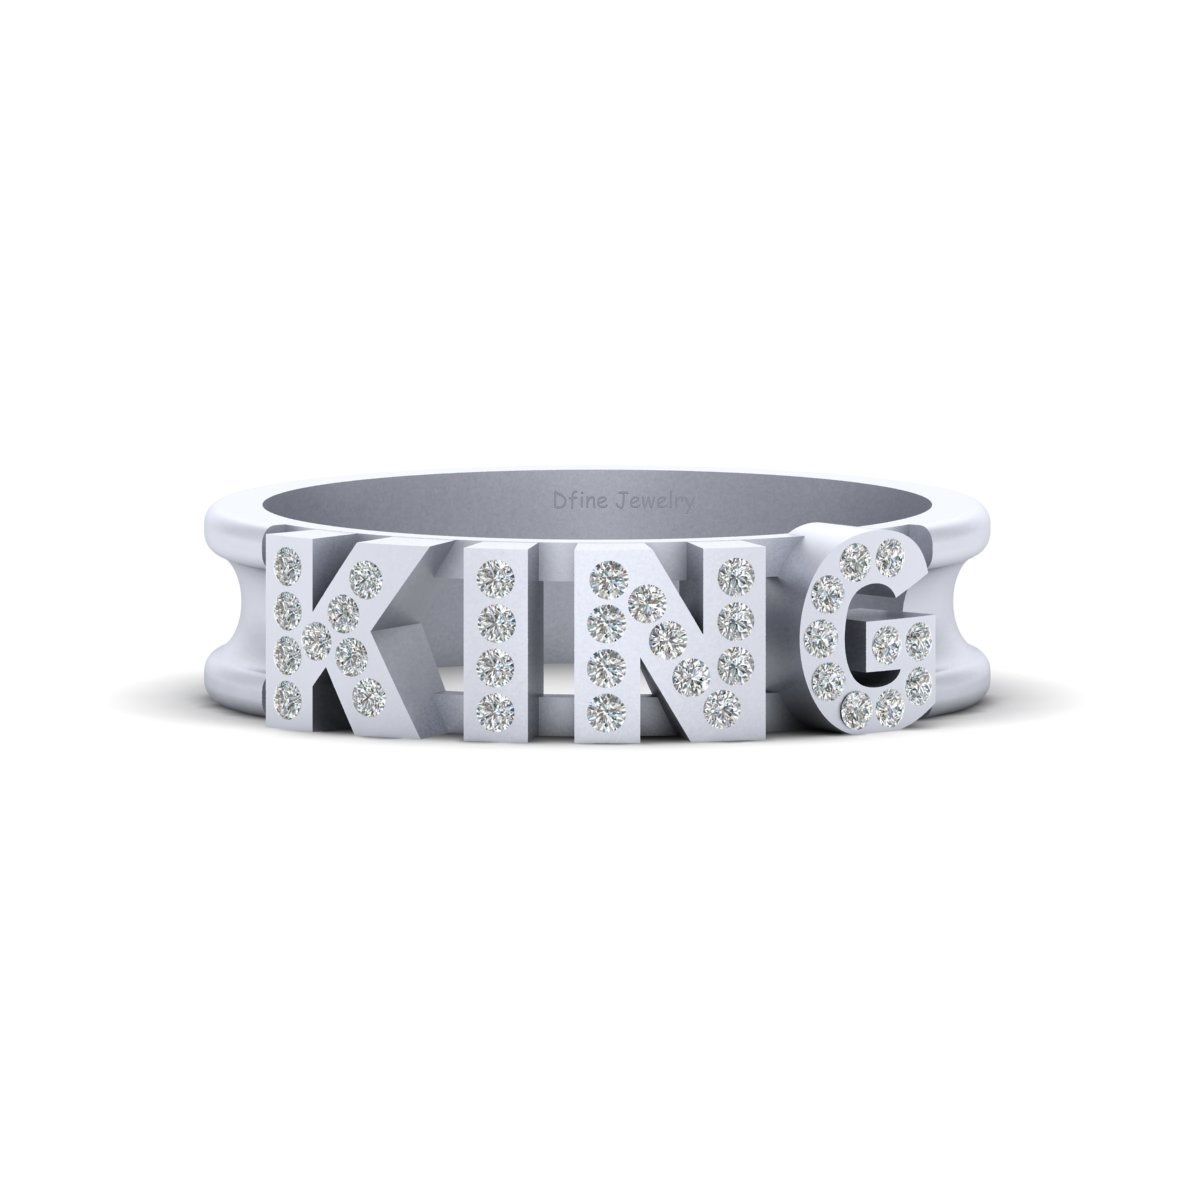 Dfj - Sterling silver engagement band emperor knight king band diamond wedding jewelry